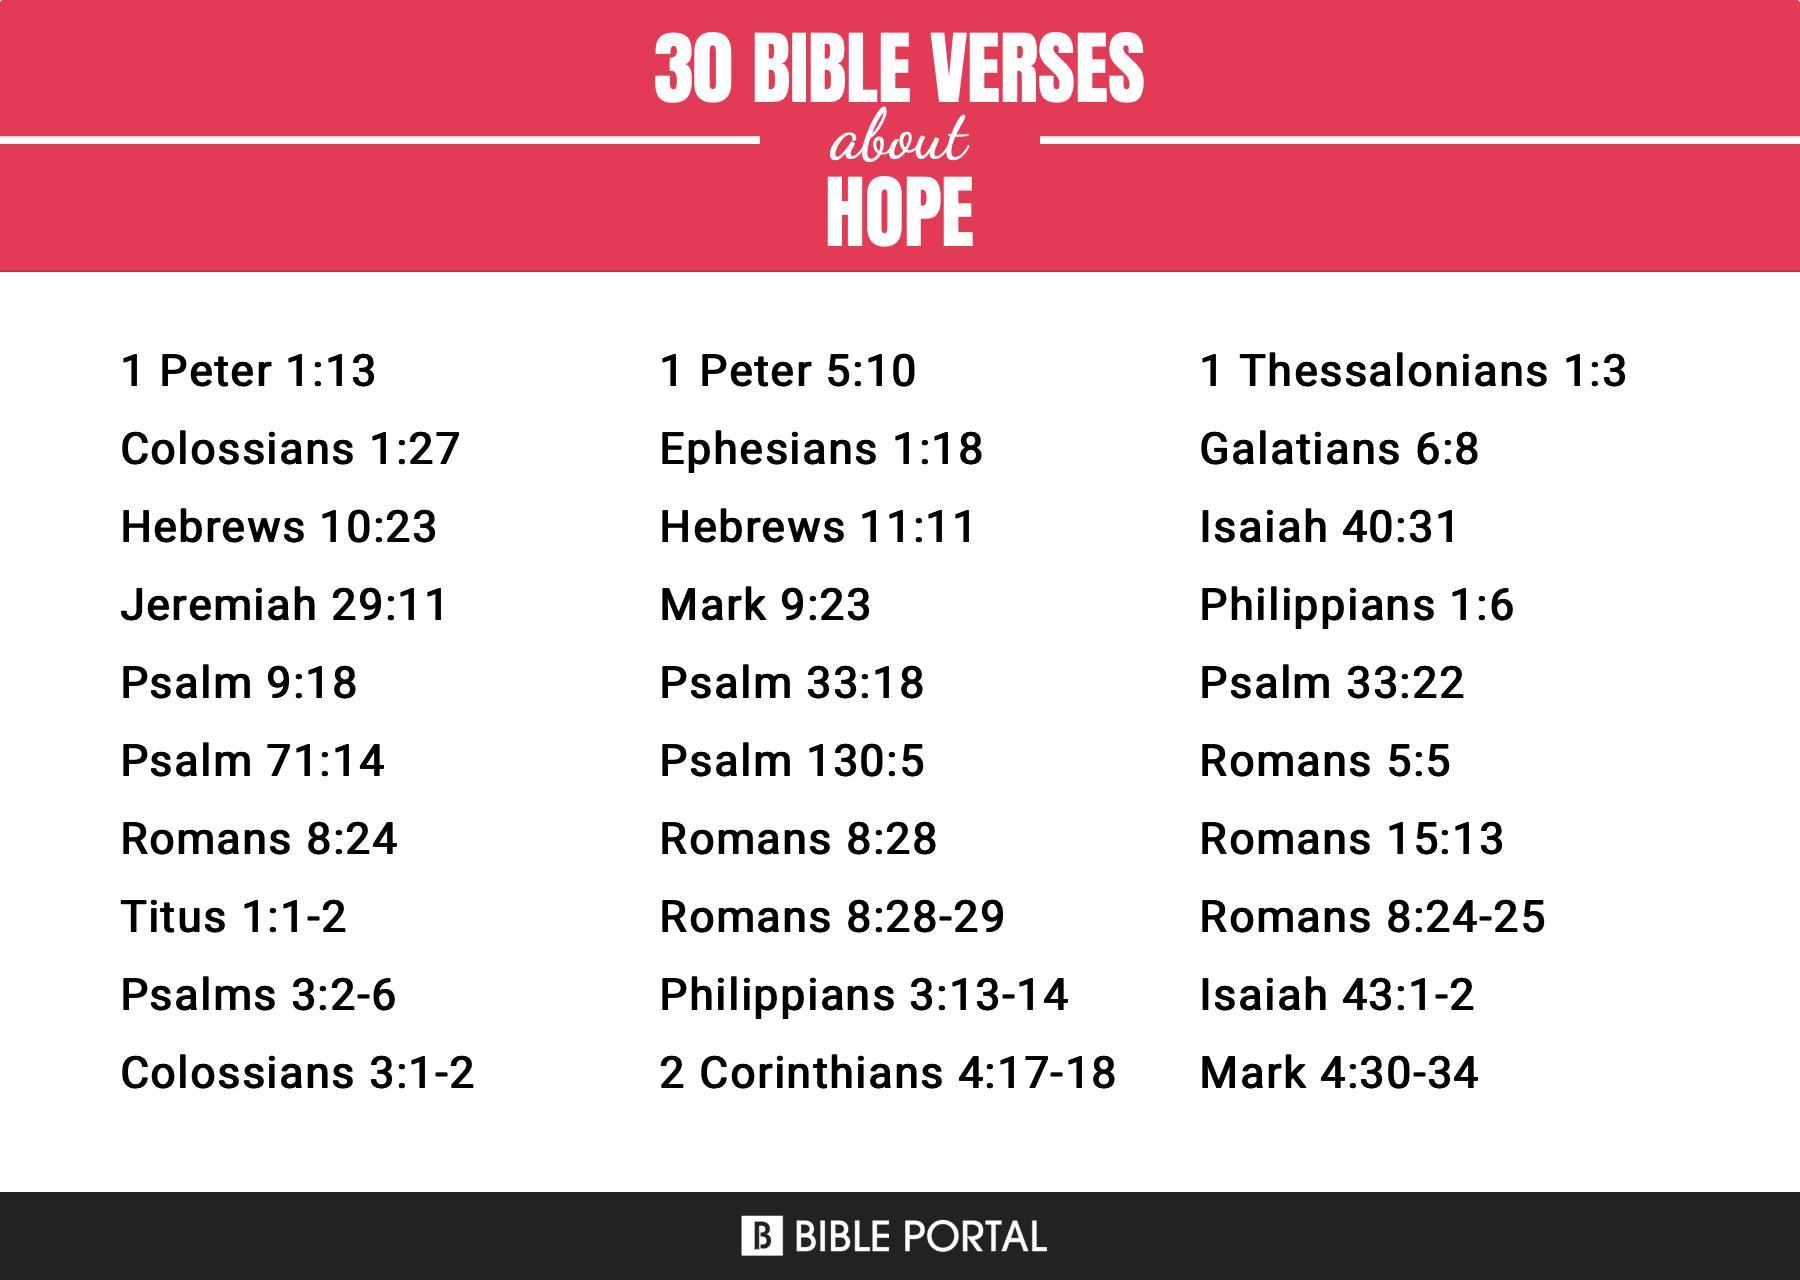 What Does the Bible Say about Hope?